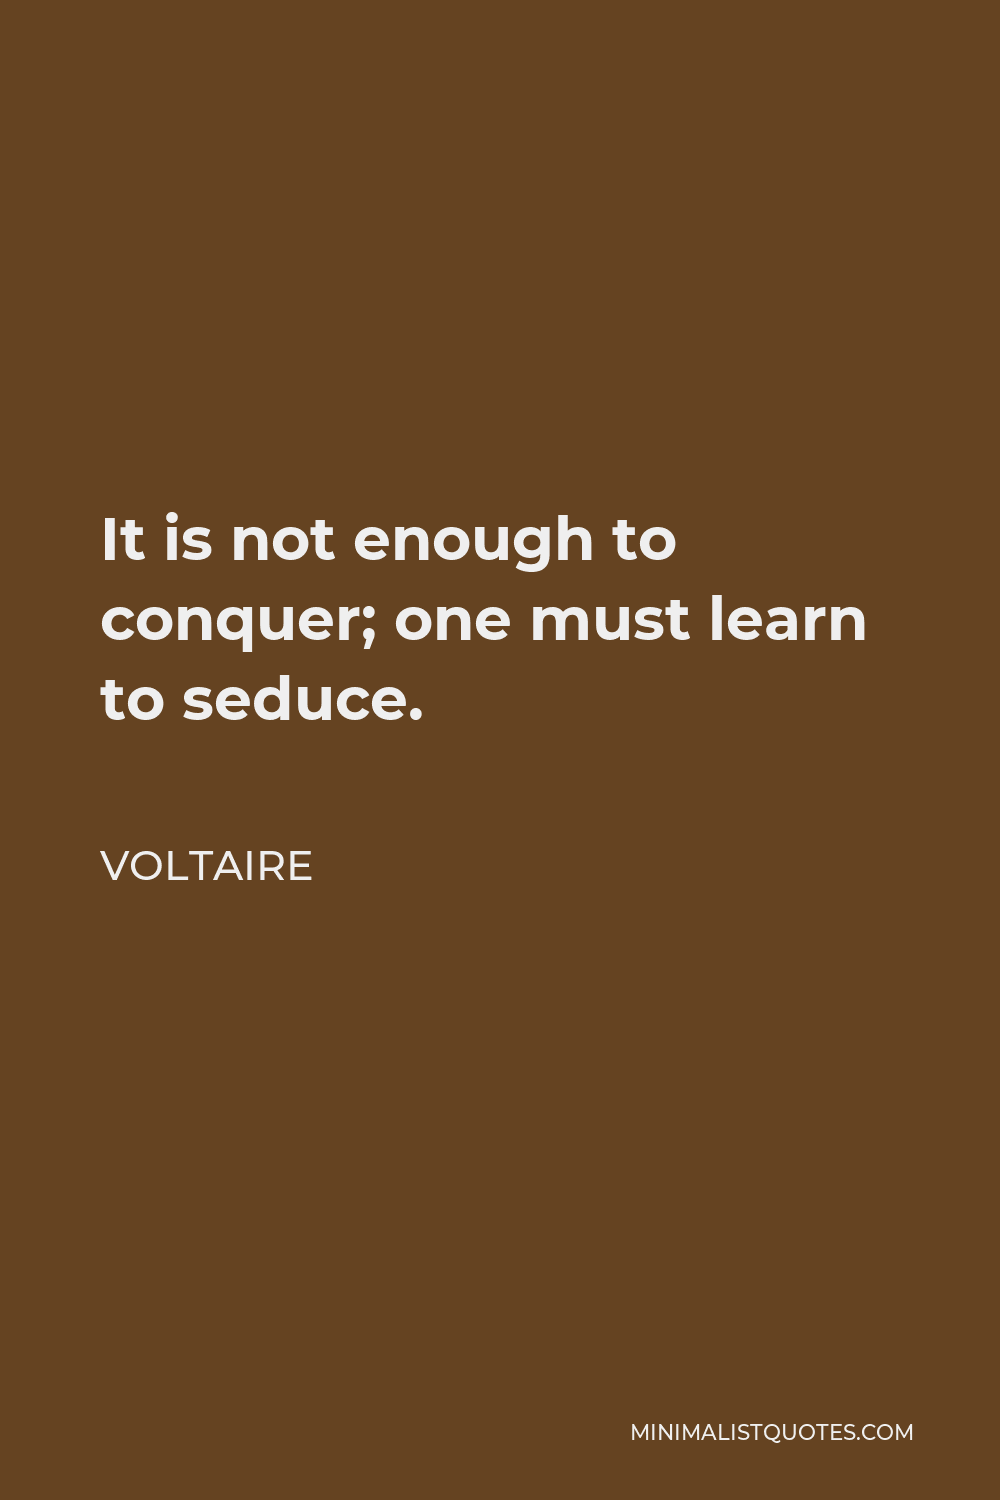 Voltaire Quote - It is not enough to conquer; one must learn to seduce.